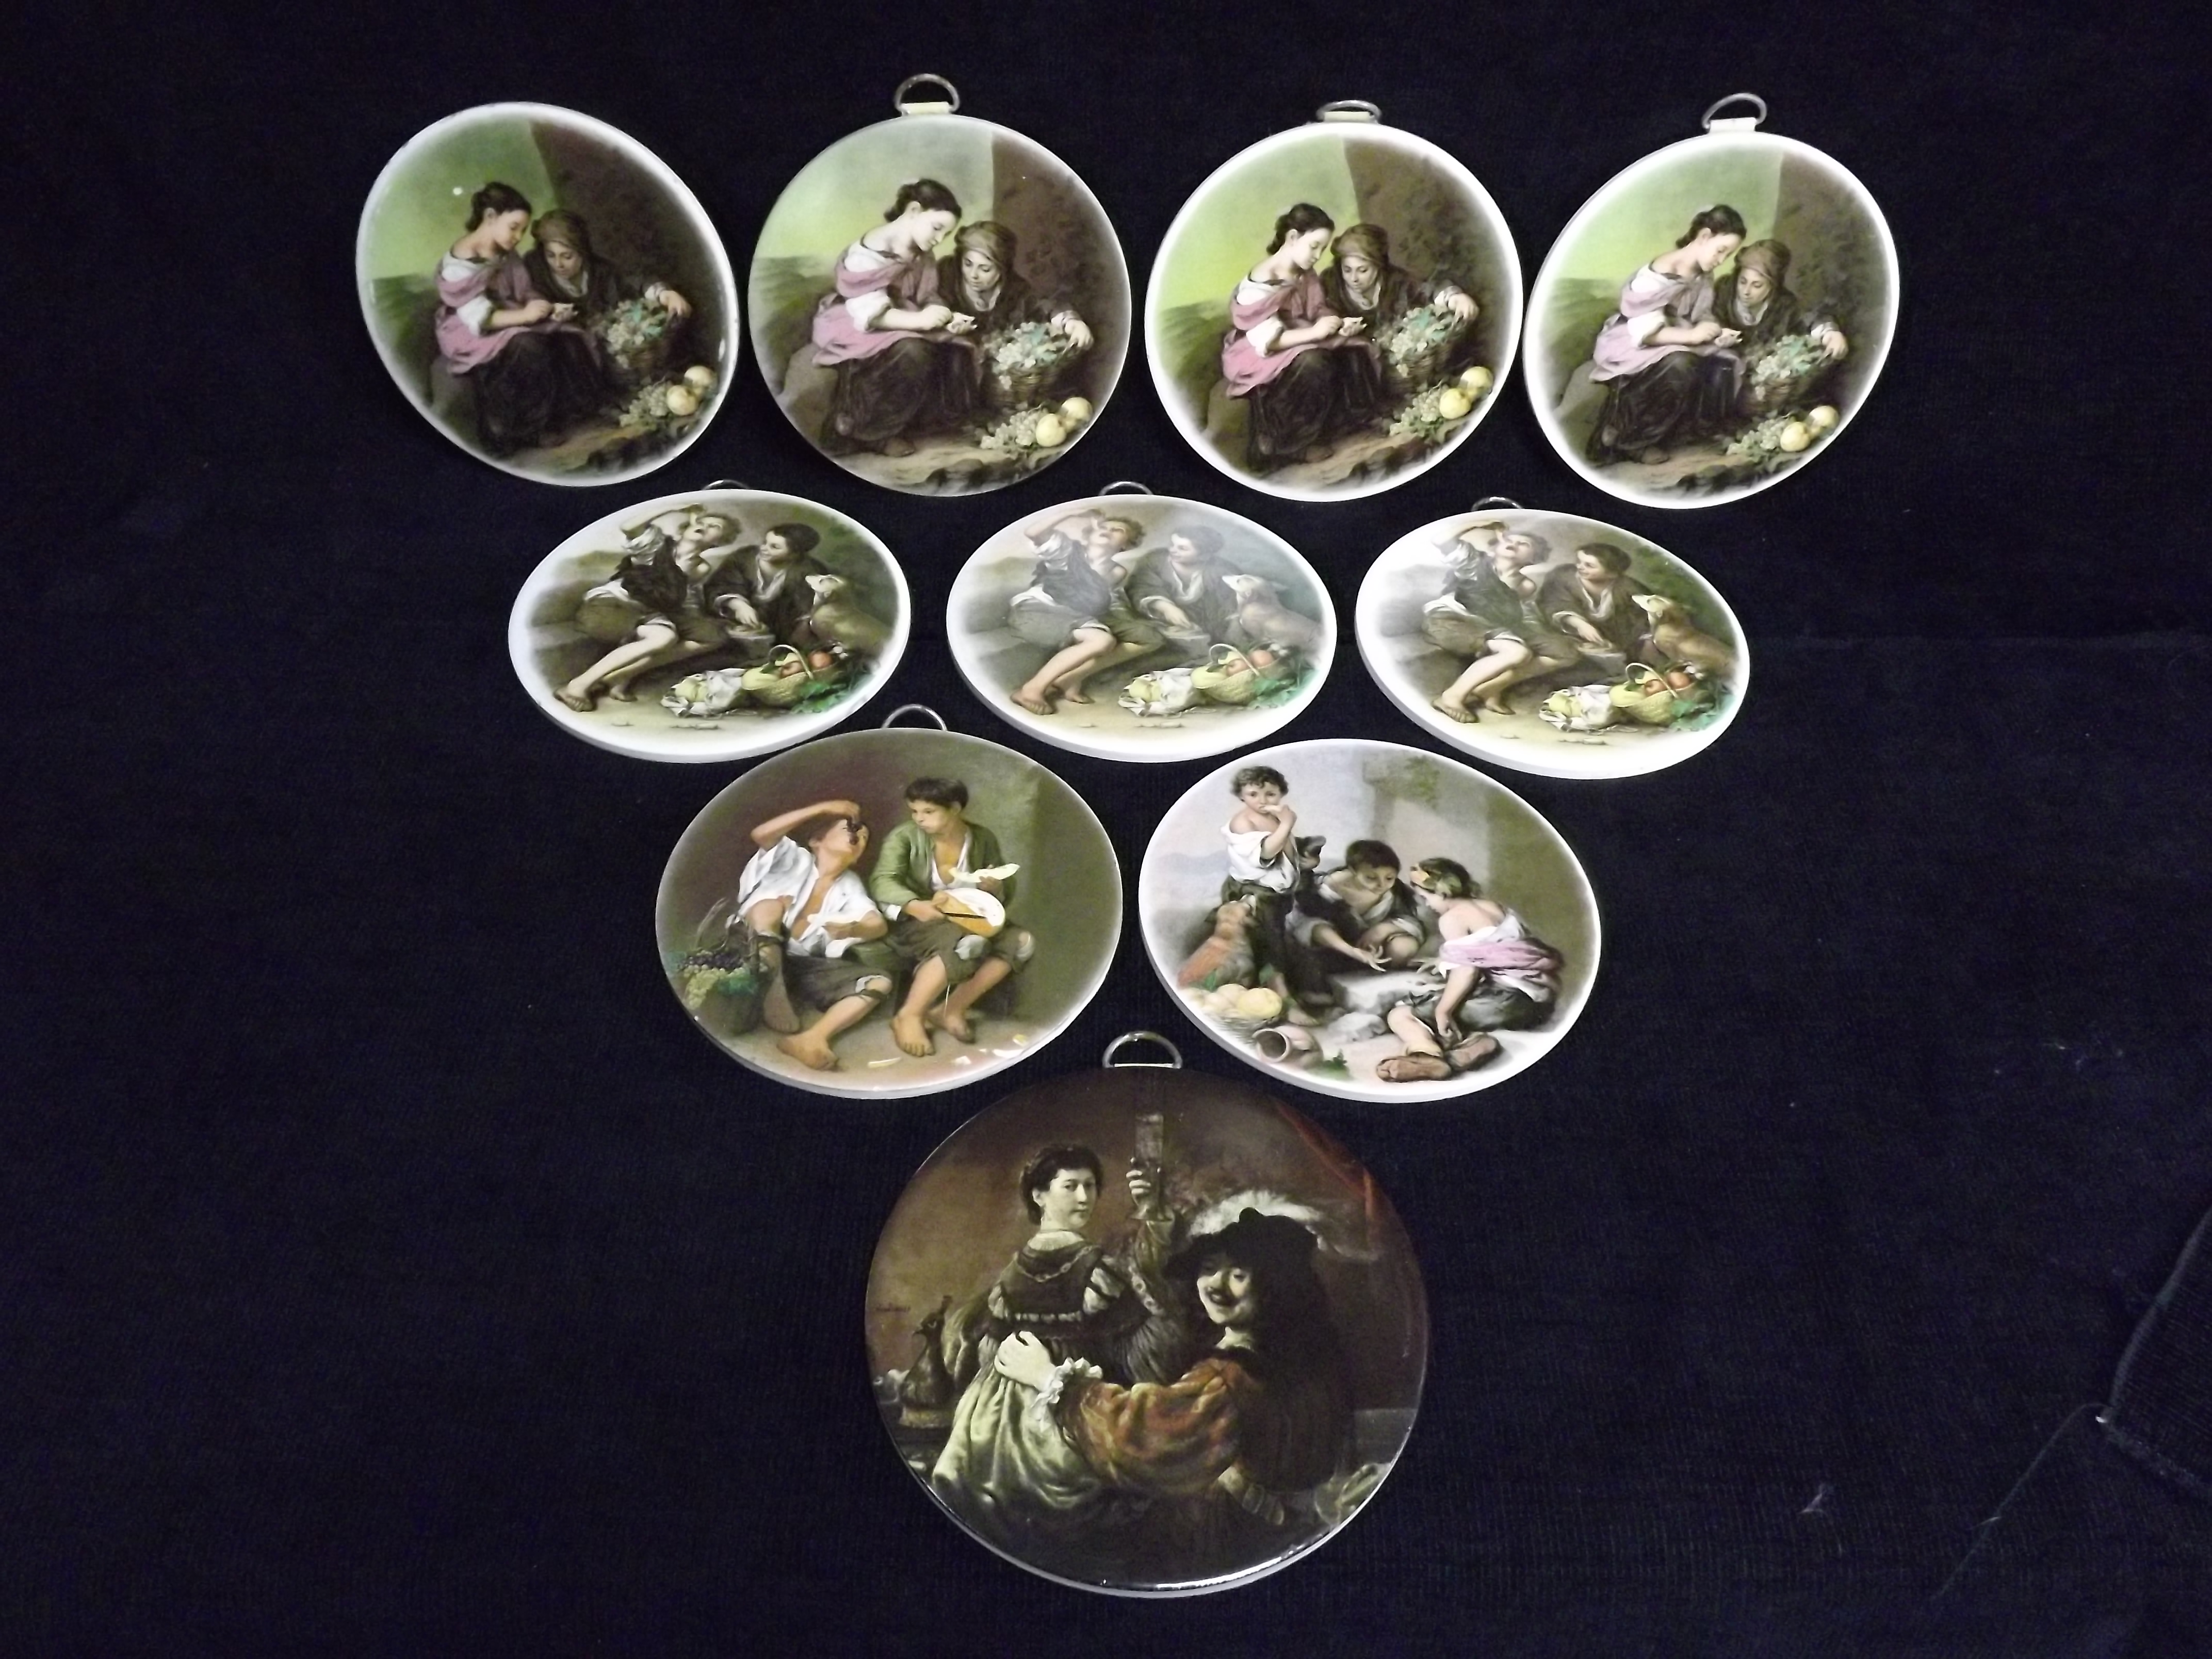 10 x H.R. Johnson England Circular Transfer Printed Tiles. Mostly depicting Children. Eight are